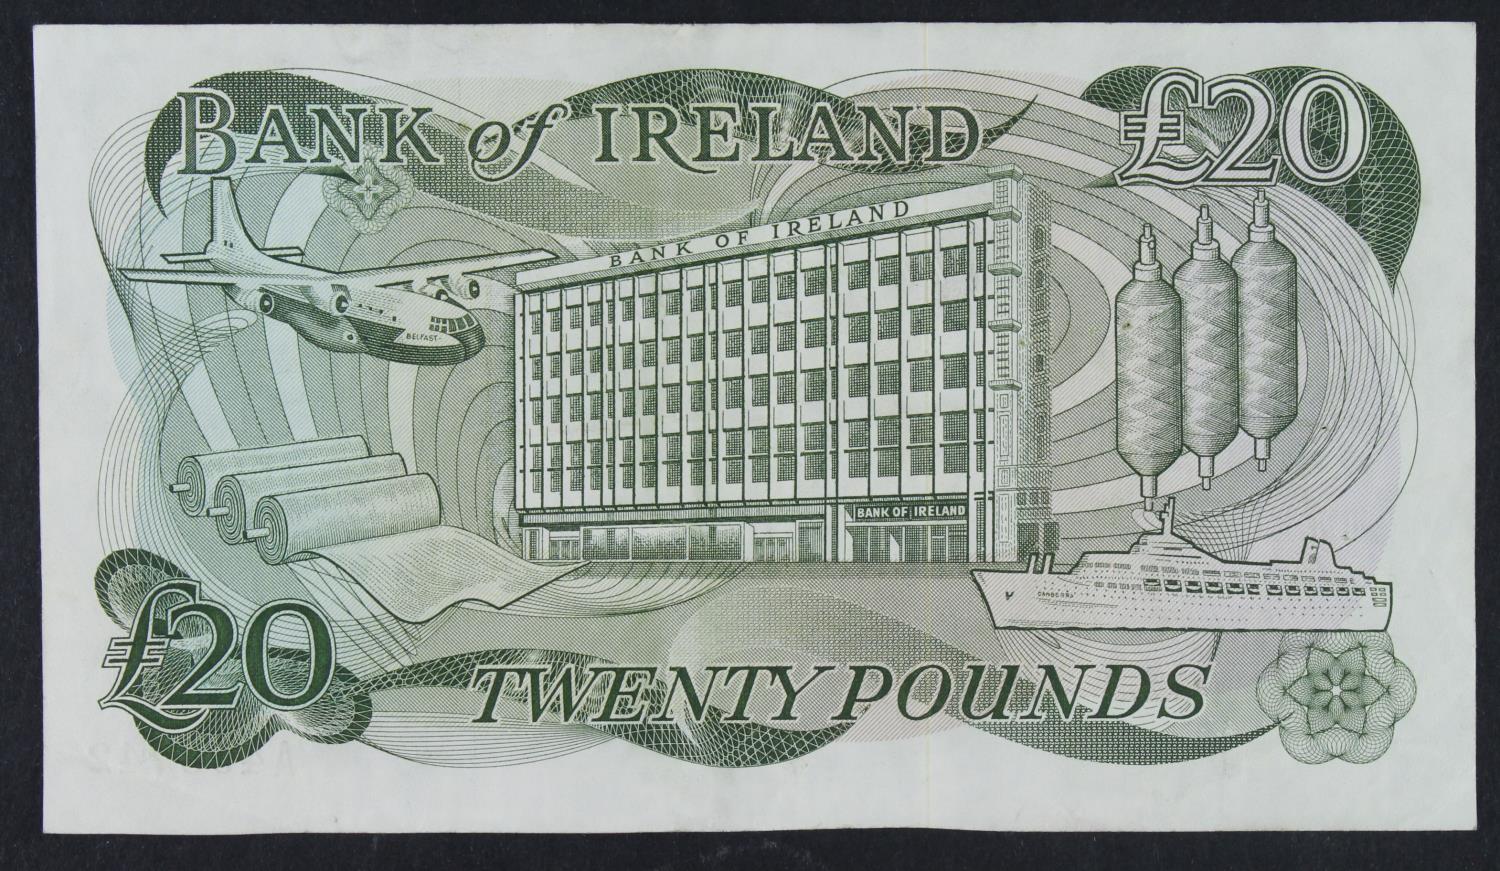 Northern Ireland, Bank of Ireland 20 Pounds issued 1983, Commemorative note Bicentenary, signed A. - Image 2 of 2